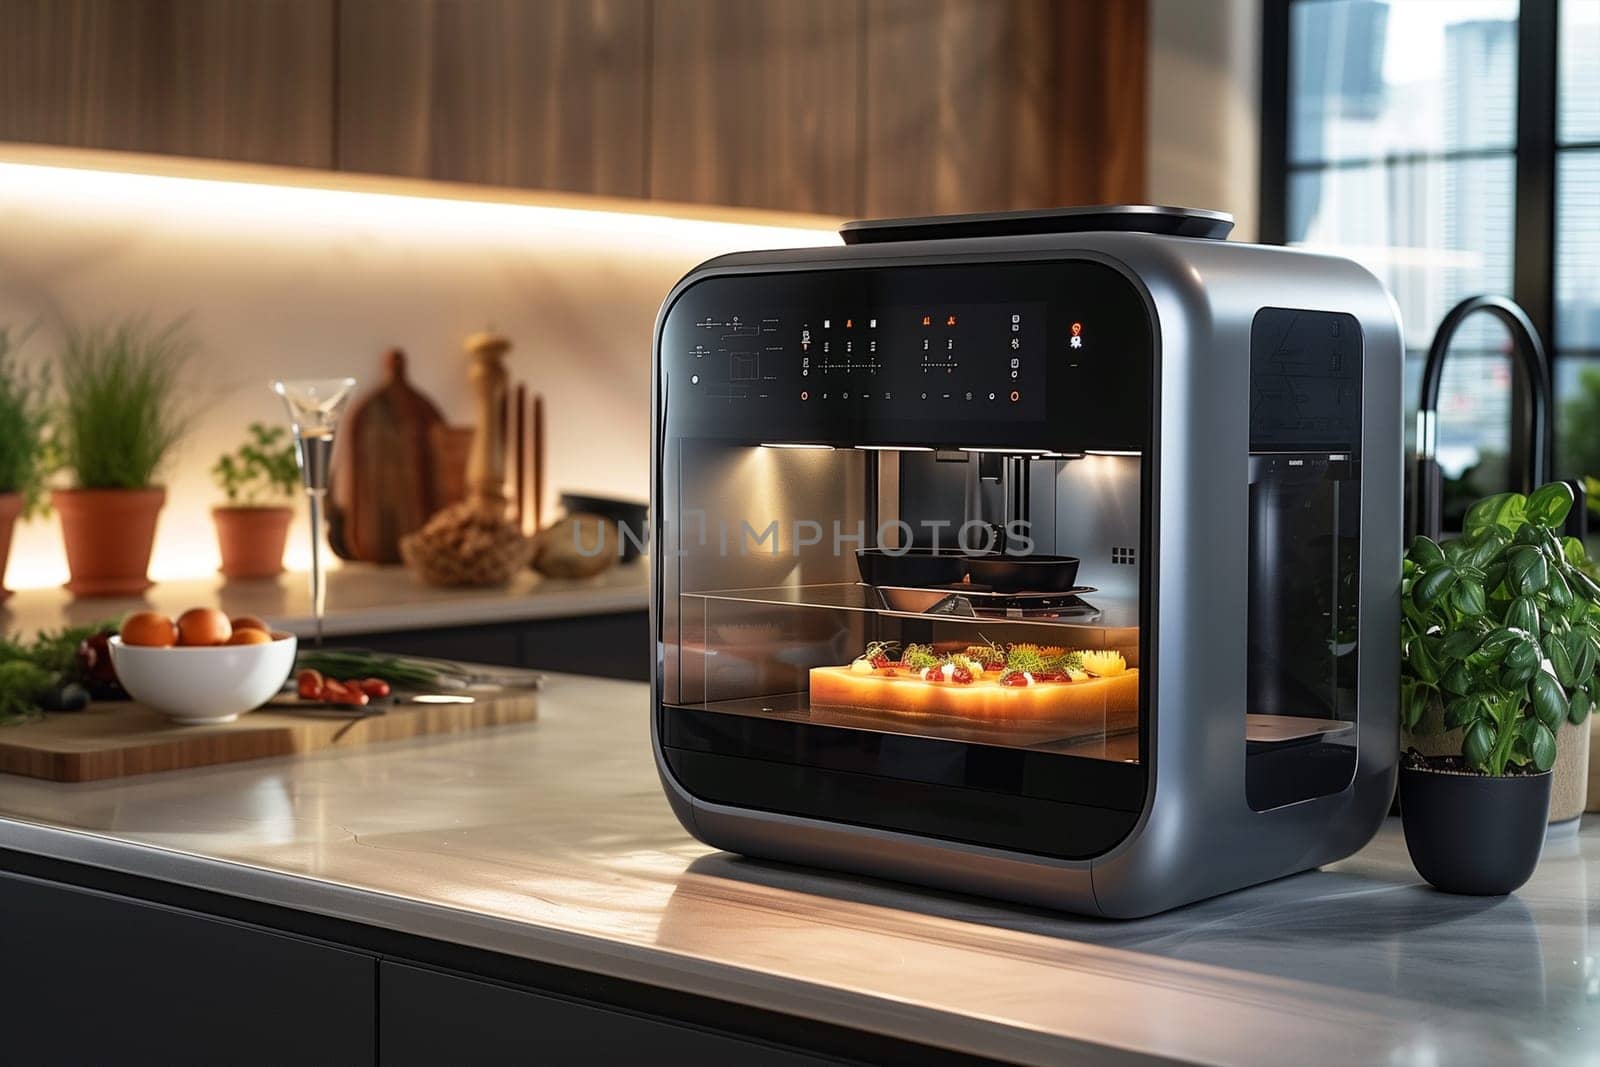 There is a home 3D printer in the kitchen that creates dishes. Futuristic house concept.